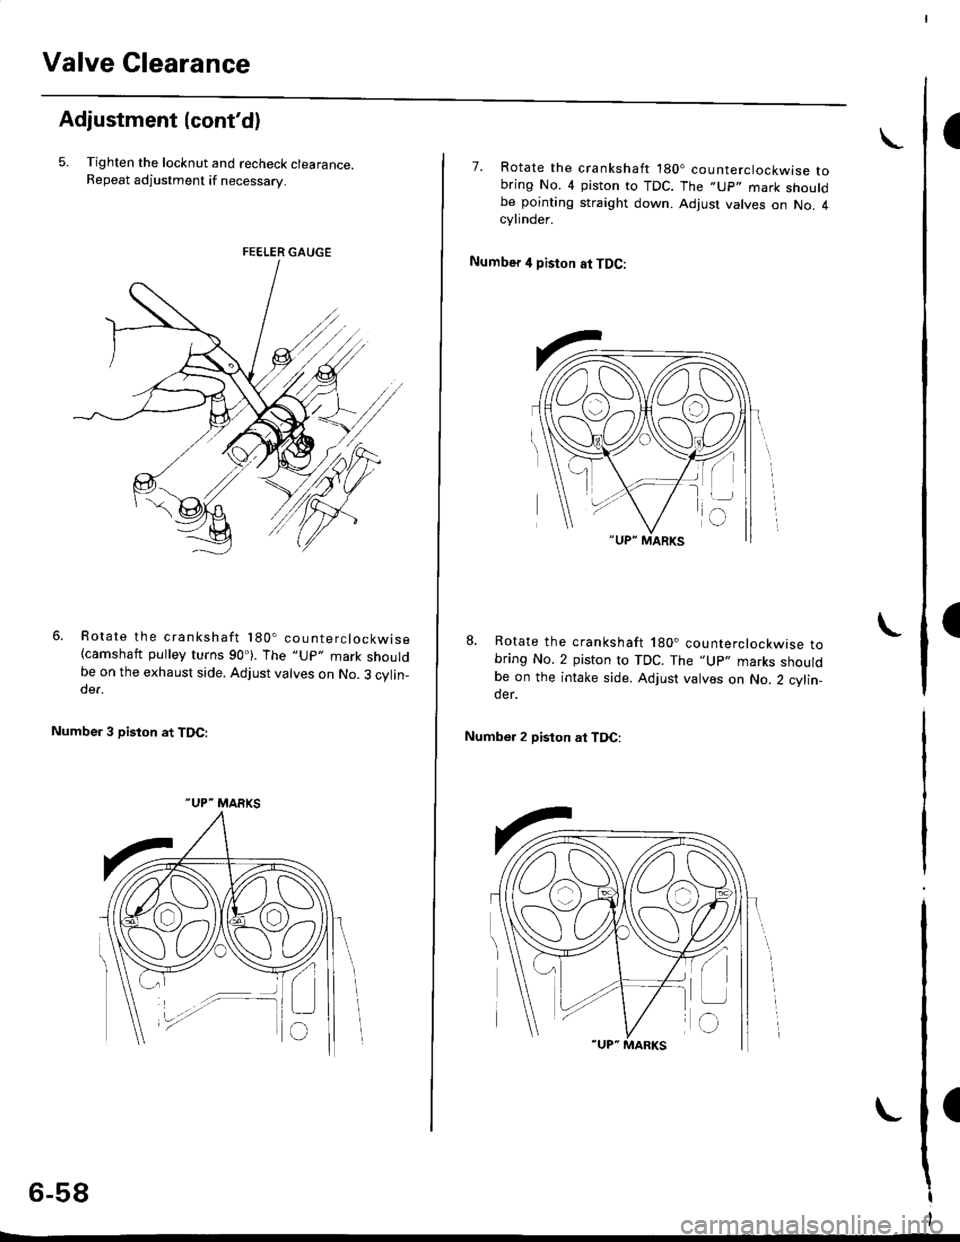 HONDA CIVIC 1999 6.G Workshop Manual Valve Clearance
I
I
I
Adjustment {contd)
5. Tighten the locknut and recheck clearance.Repeat adjustment if necessary.
Rotate the crankshaft 180. counterclockwise(camshaft pulley turns 90). The "Up" 